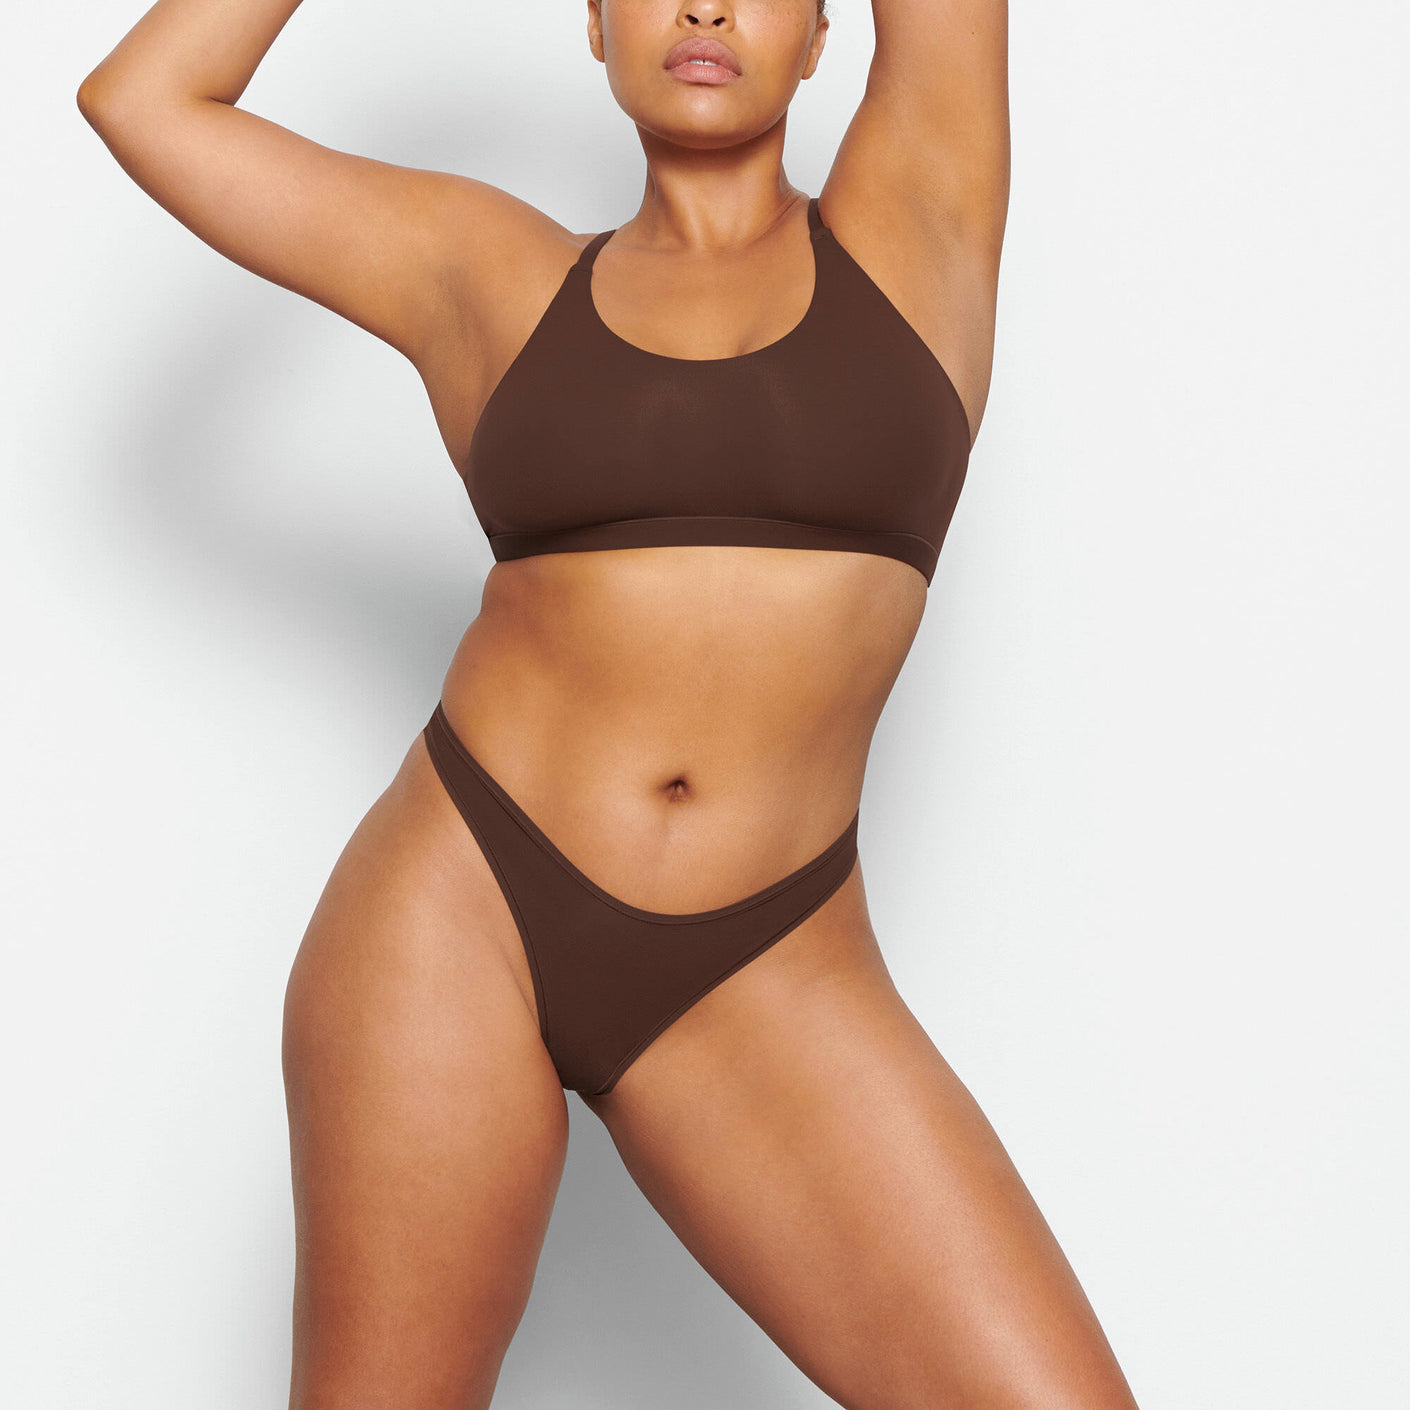 SKIMS Cocoa Bikini Top Brown Size XXS - $44 New With Tags - From Maria